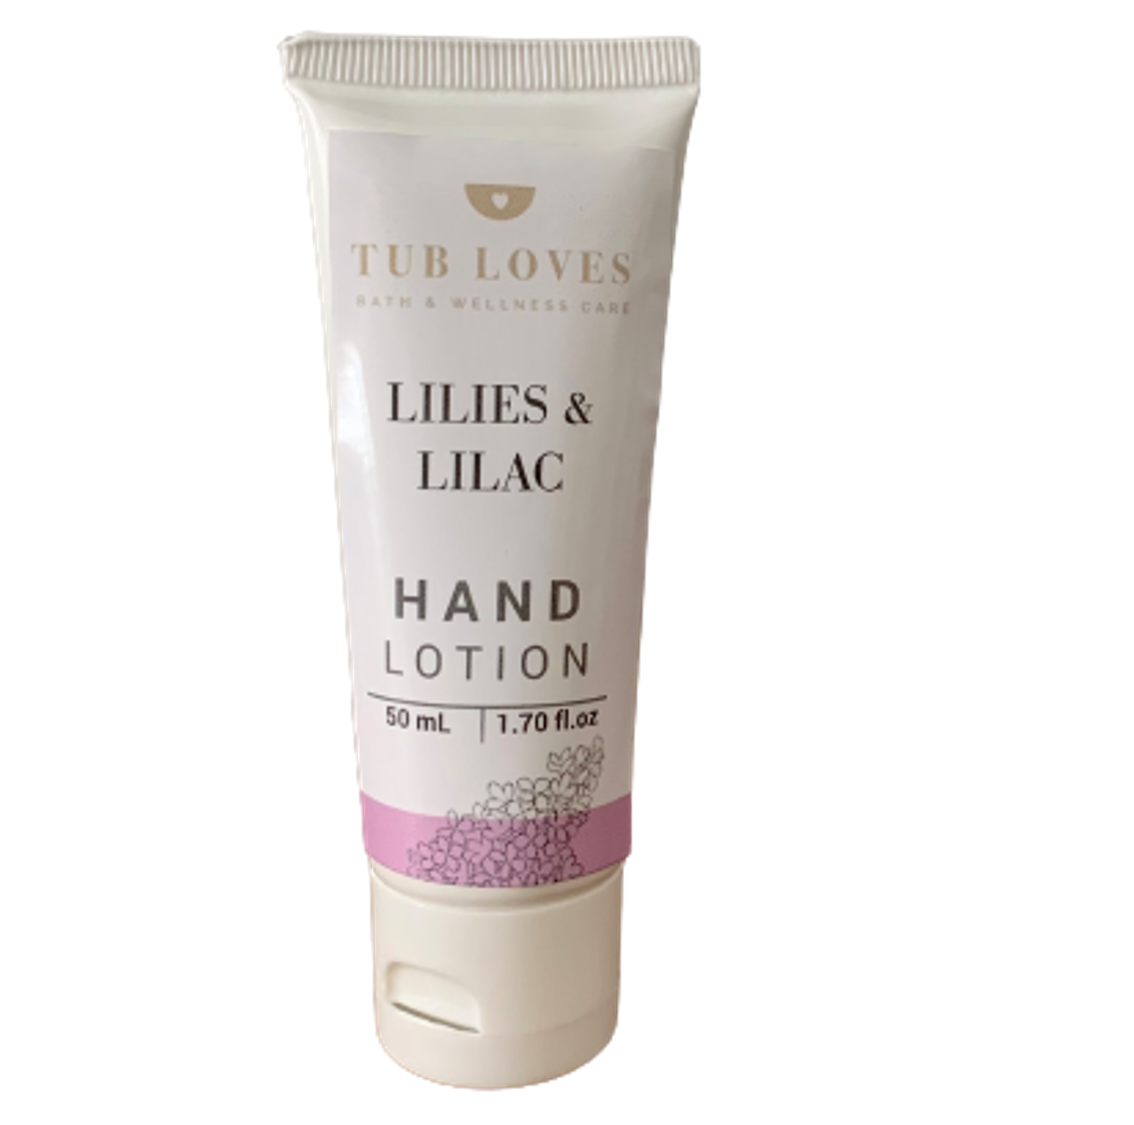 Lilies & Lilac - Hand Lotion